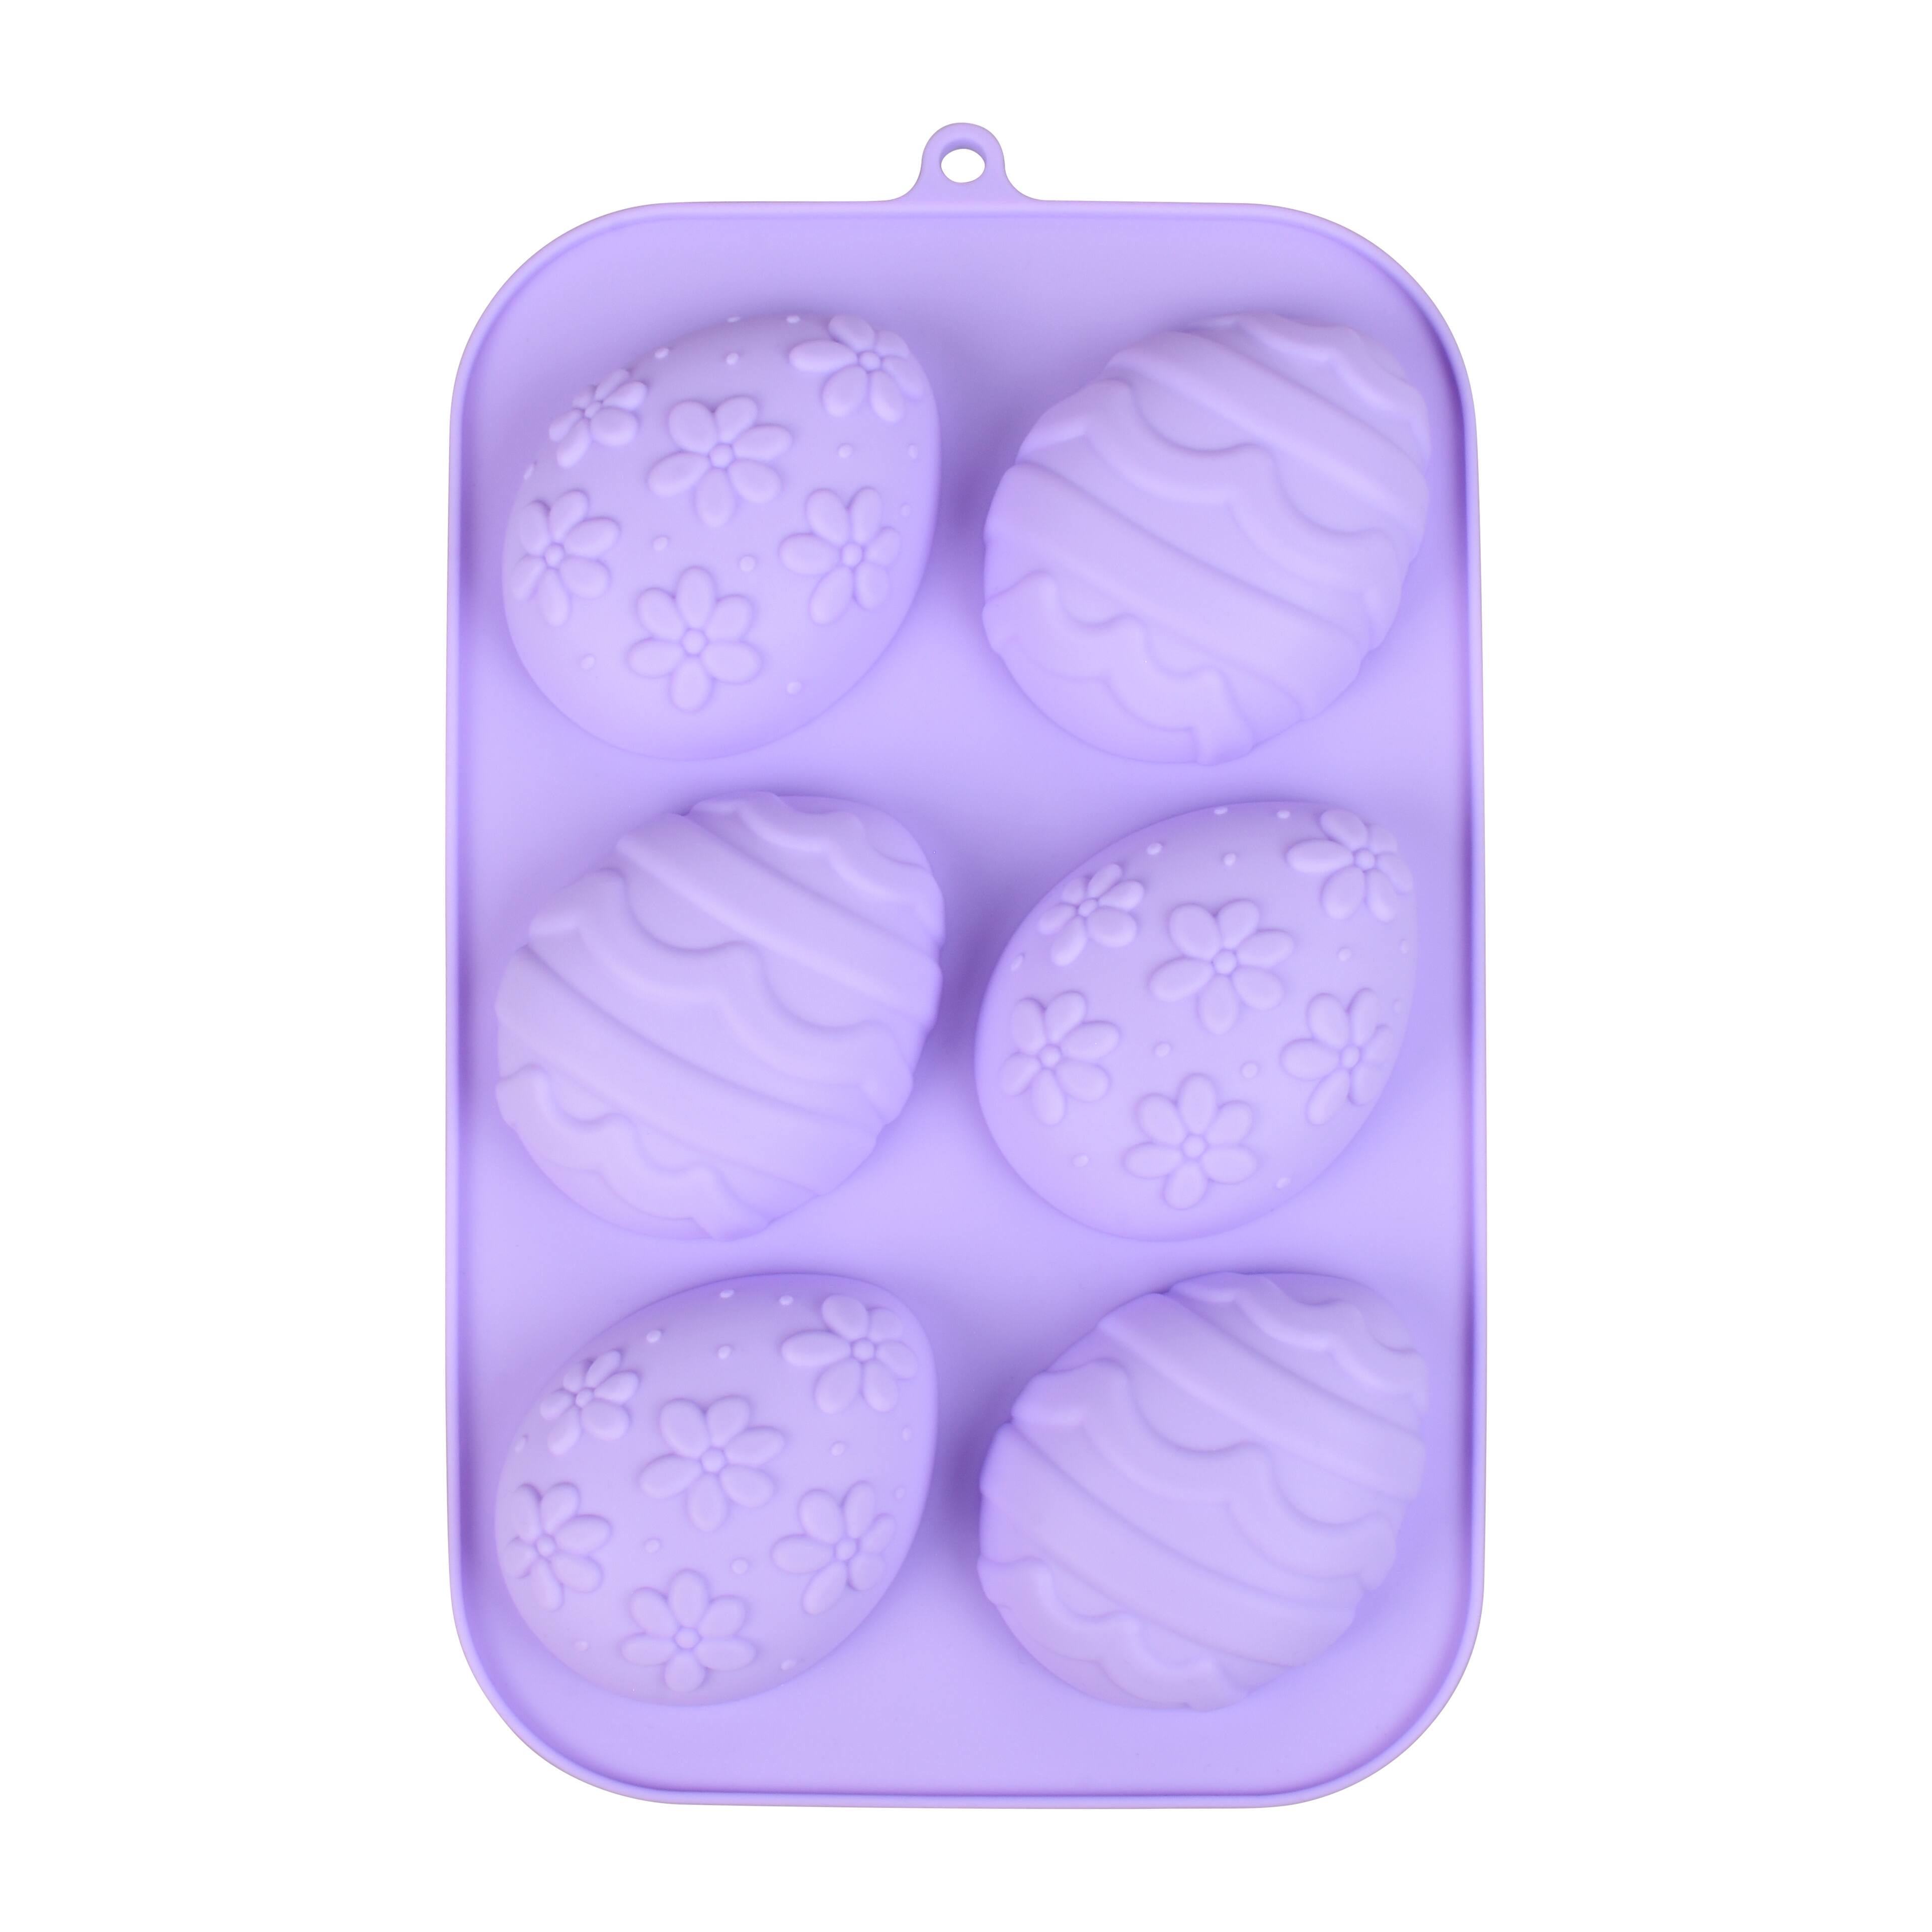 EASTER EGG SILICONE MOLD